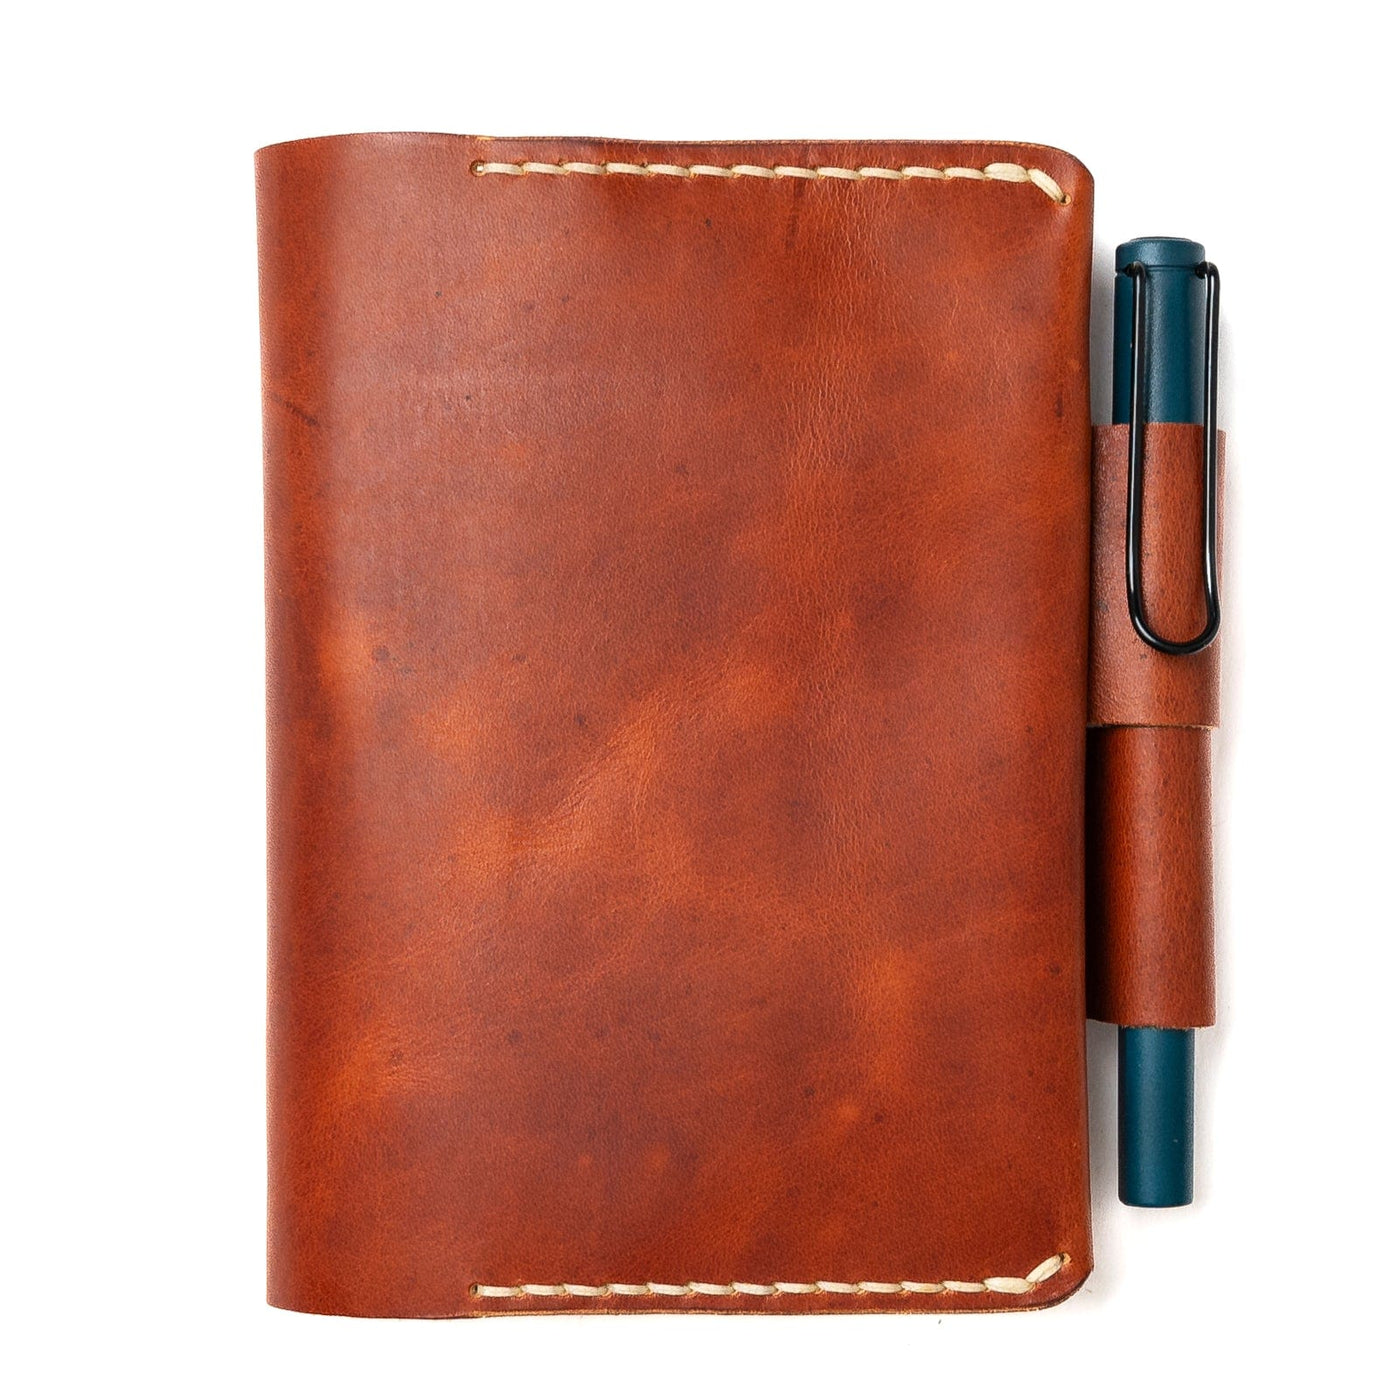 Leather A6 Notebook Cover - English Tan Popov Leather